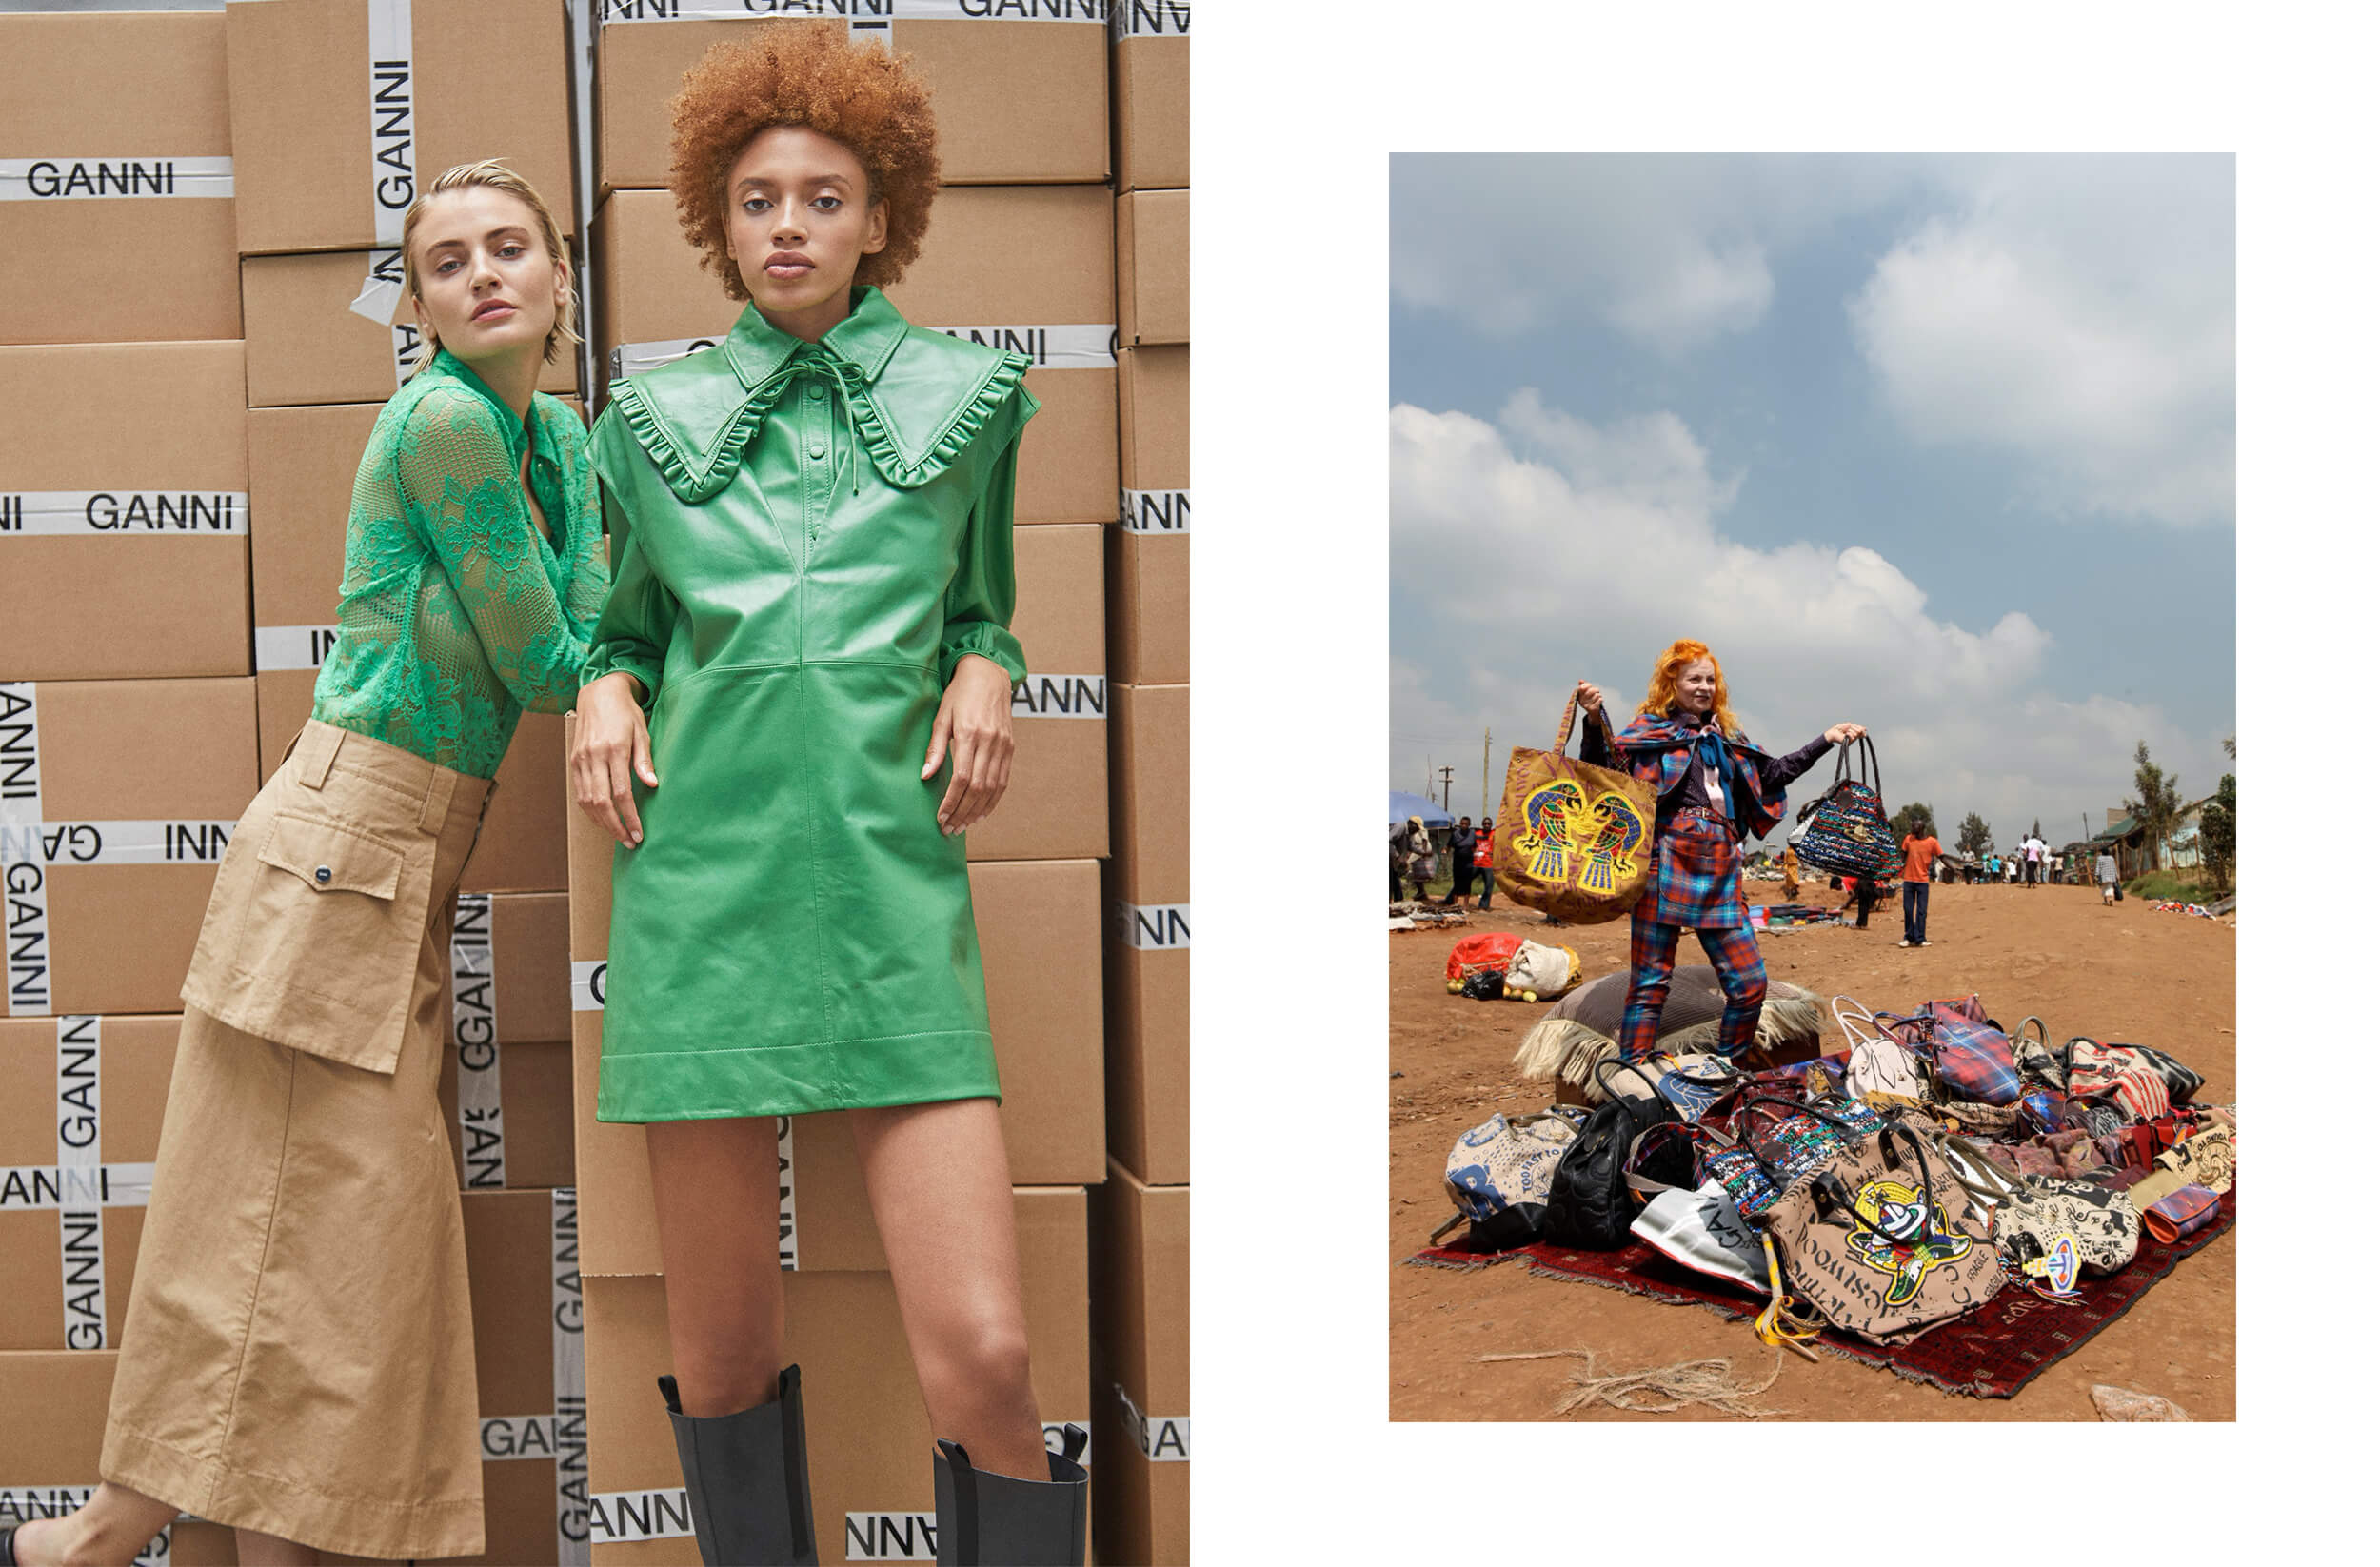 Stella McCartney. A sustainable fashion brand - The Sustainable Mag